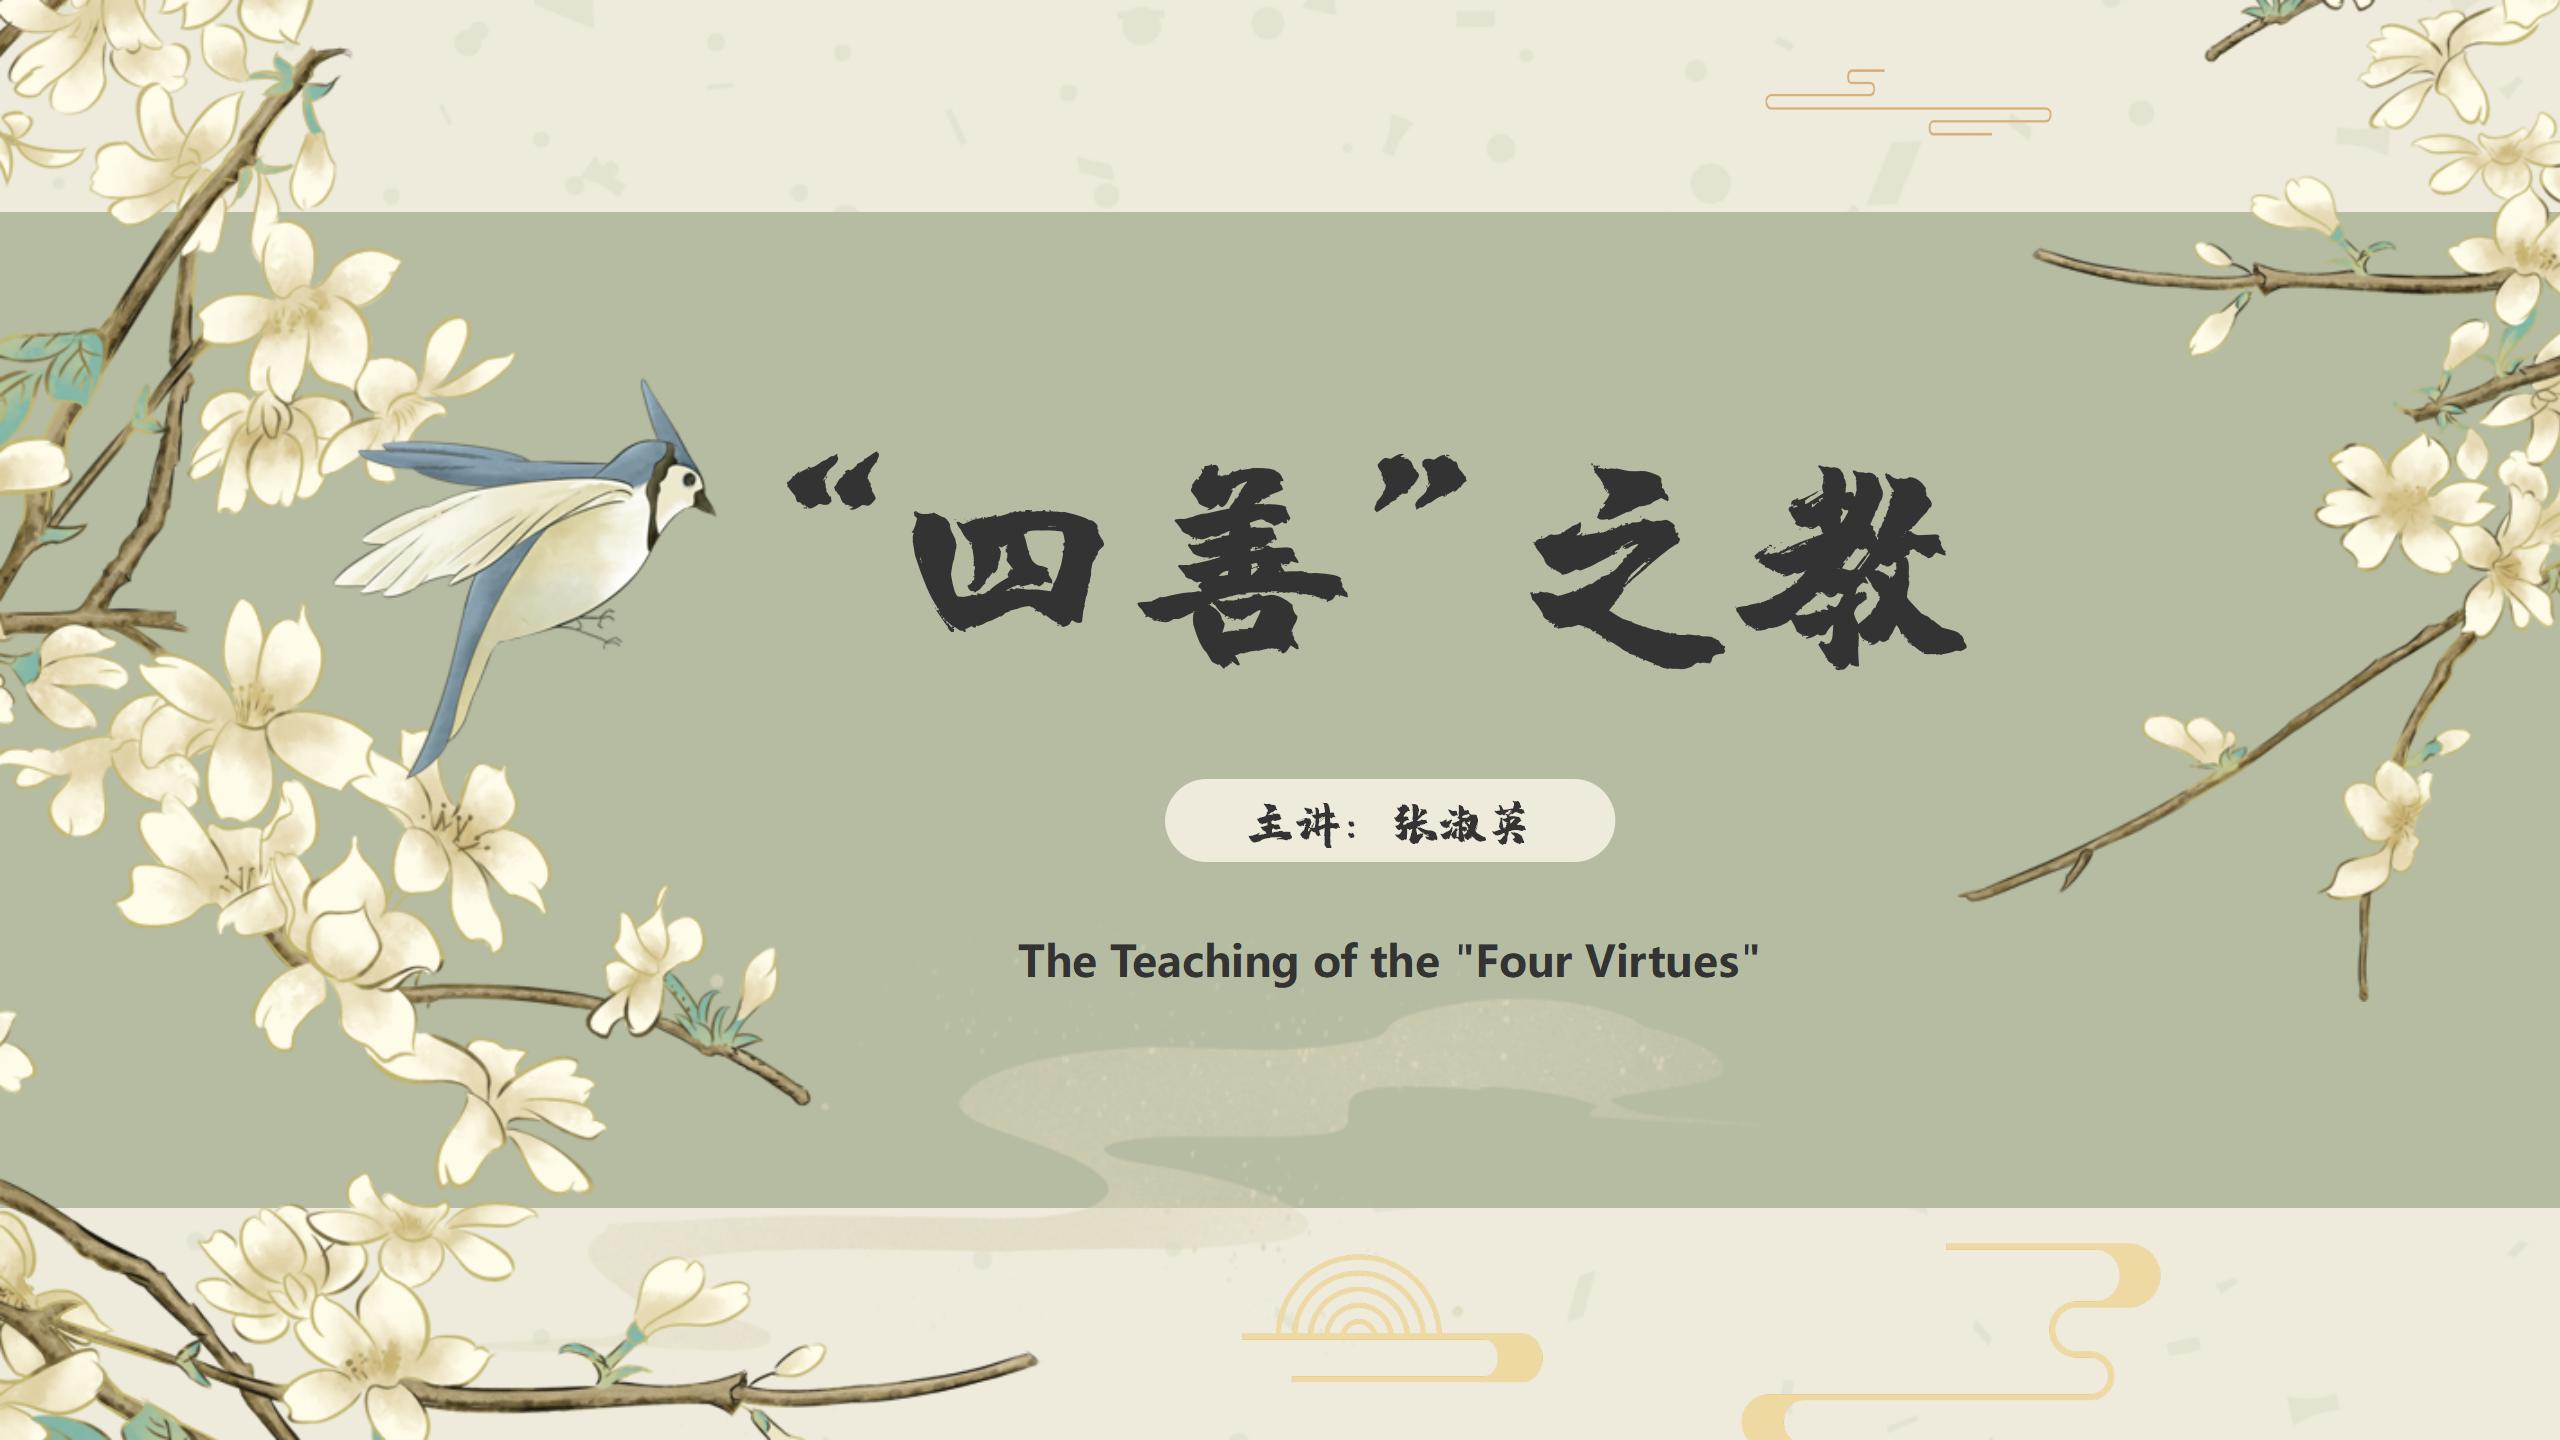 The Teaching of the “Four Virtues”